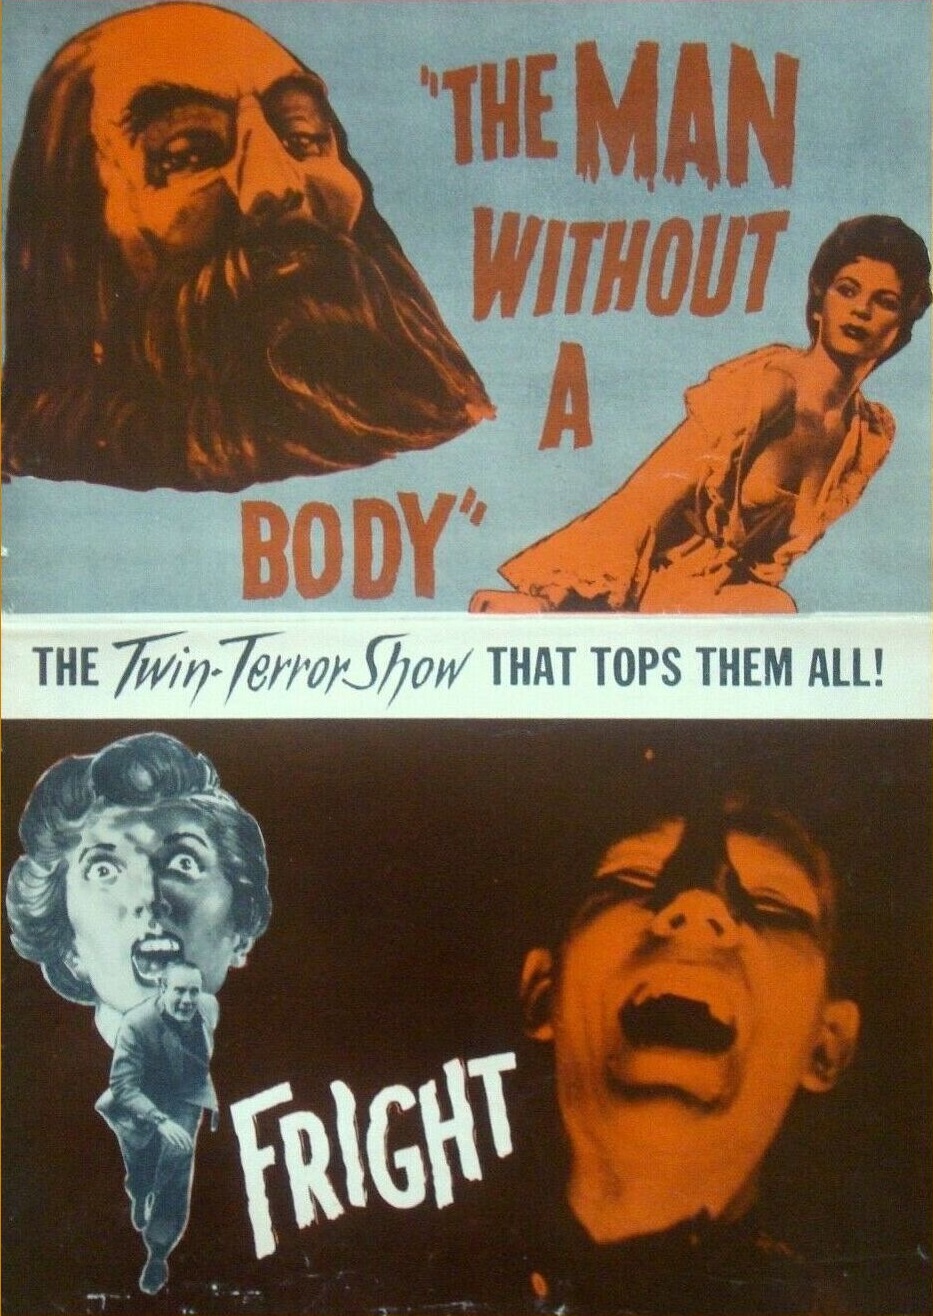 The Man Without a Body (1957) Screenshot 1